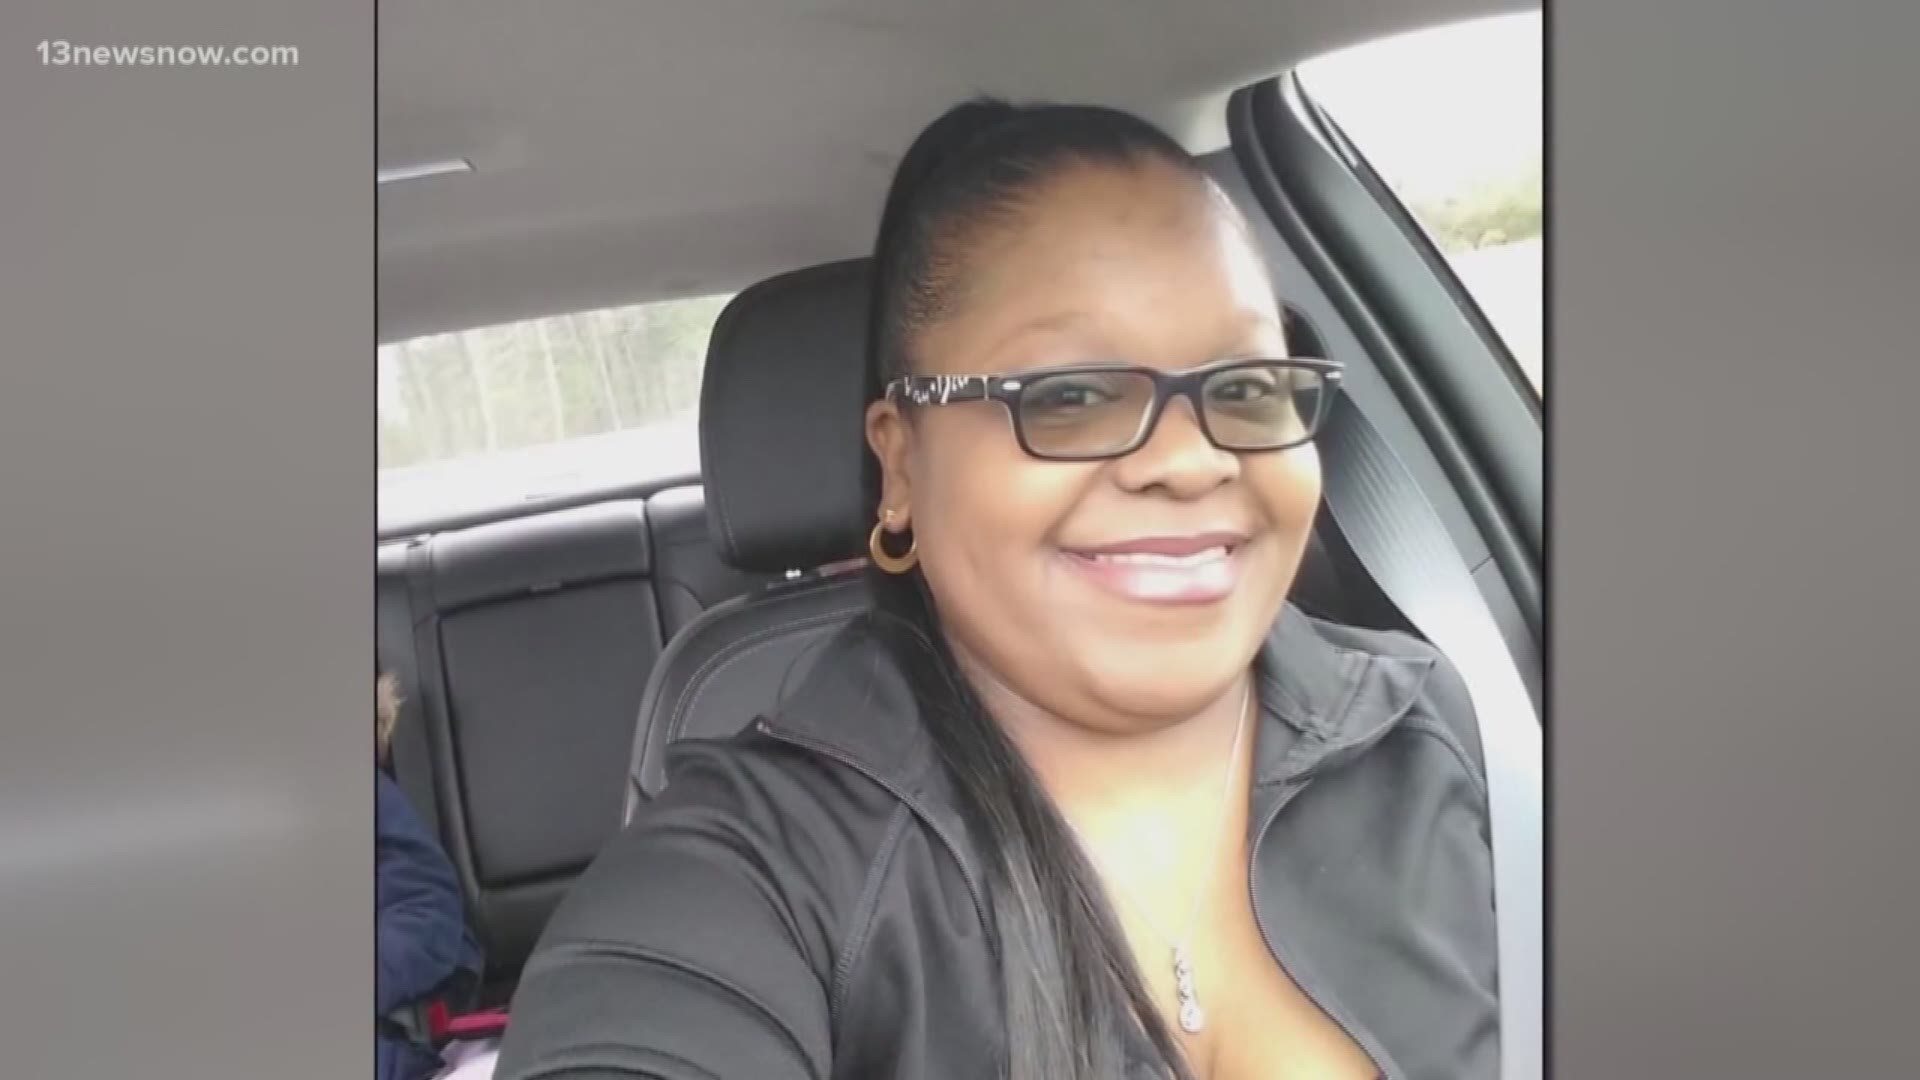 It has been almost a month since Cynthia Carver was last seen alive. The body found in Suffolk Tuesday was identified as the missing woman.